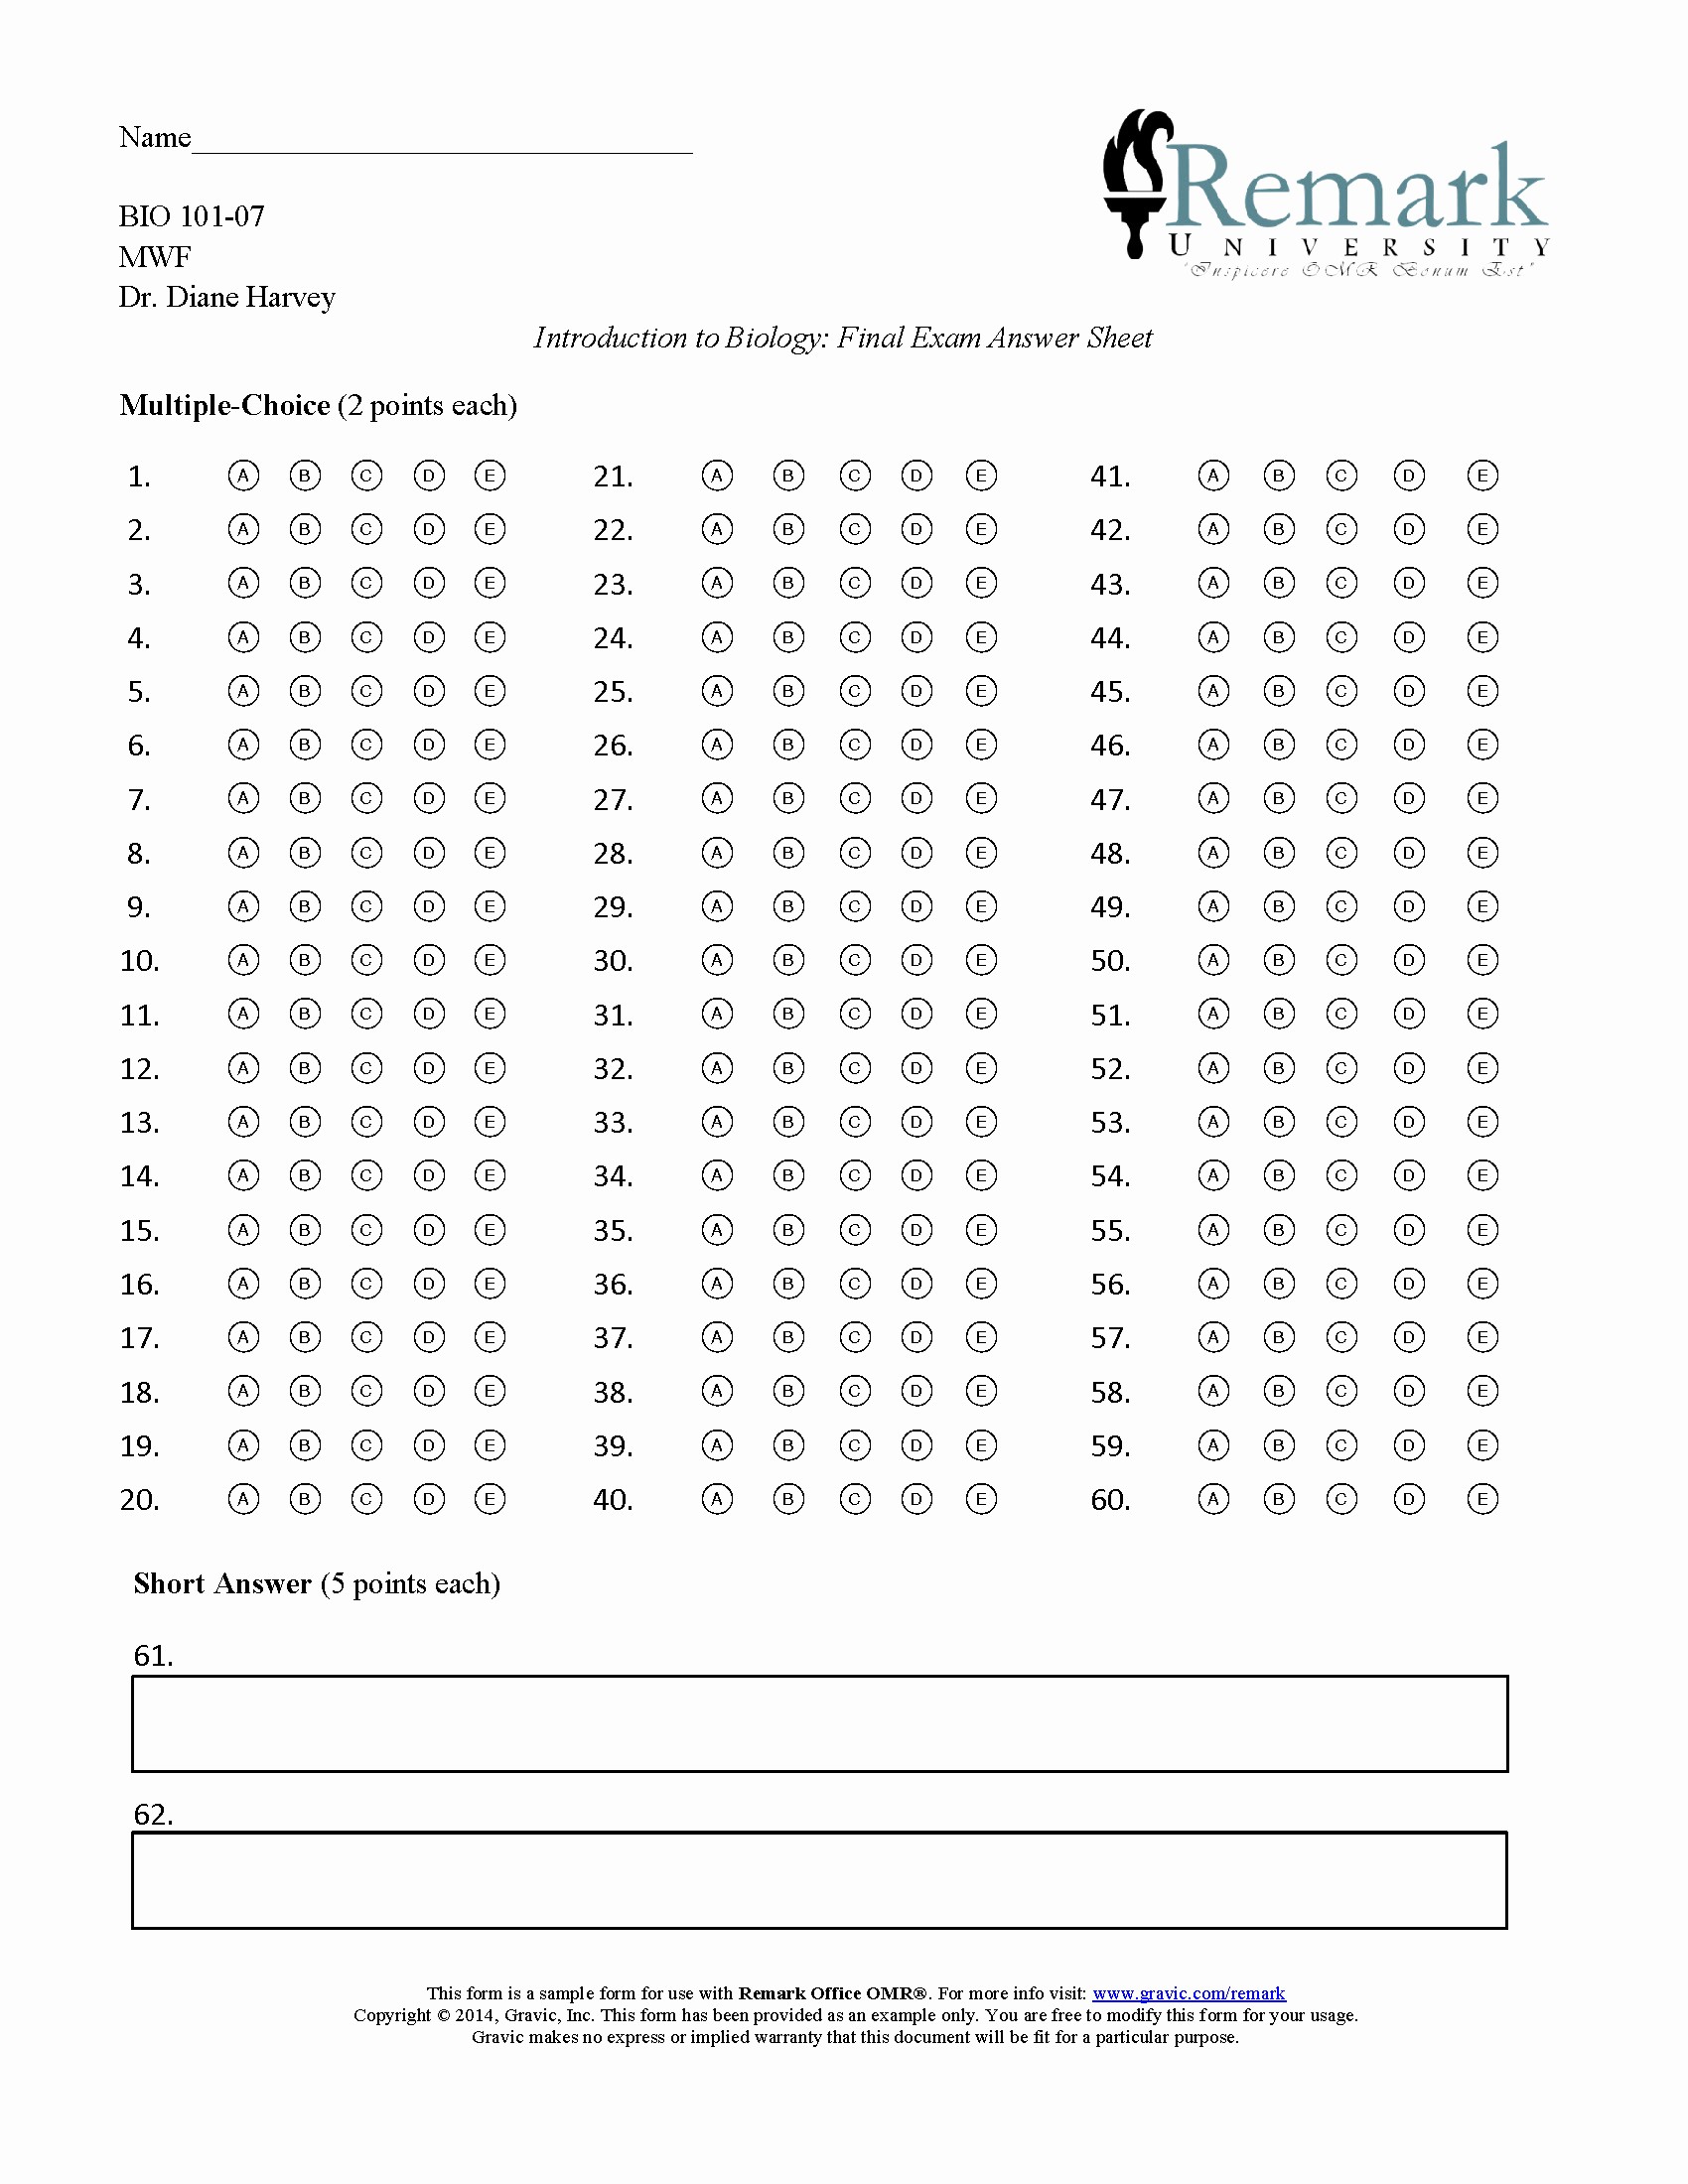 Answer Sheet Template Microsoft Word Unique 60 Question Test Answer Sheet · Remark software